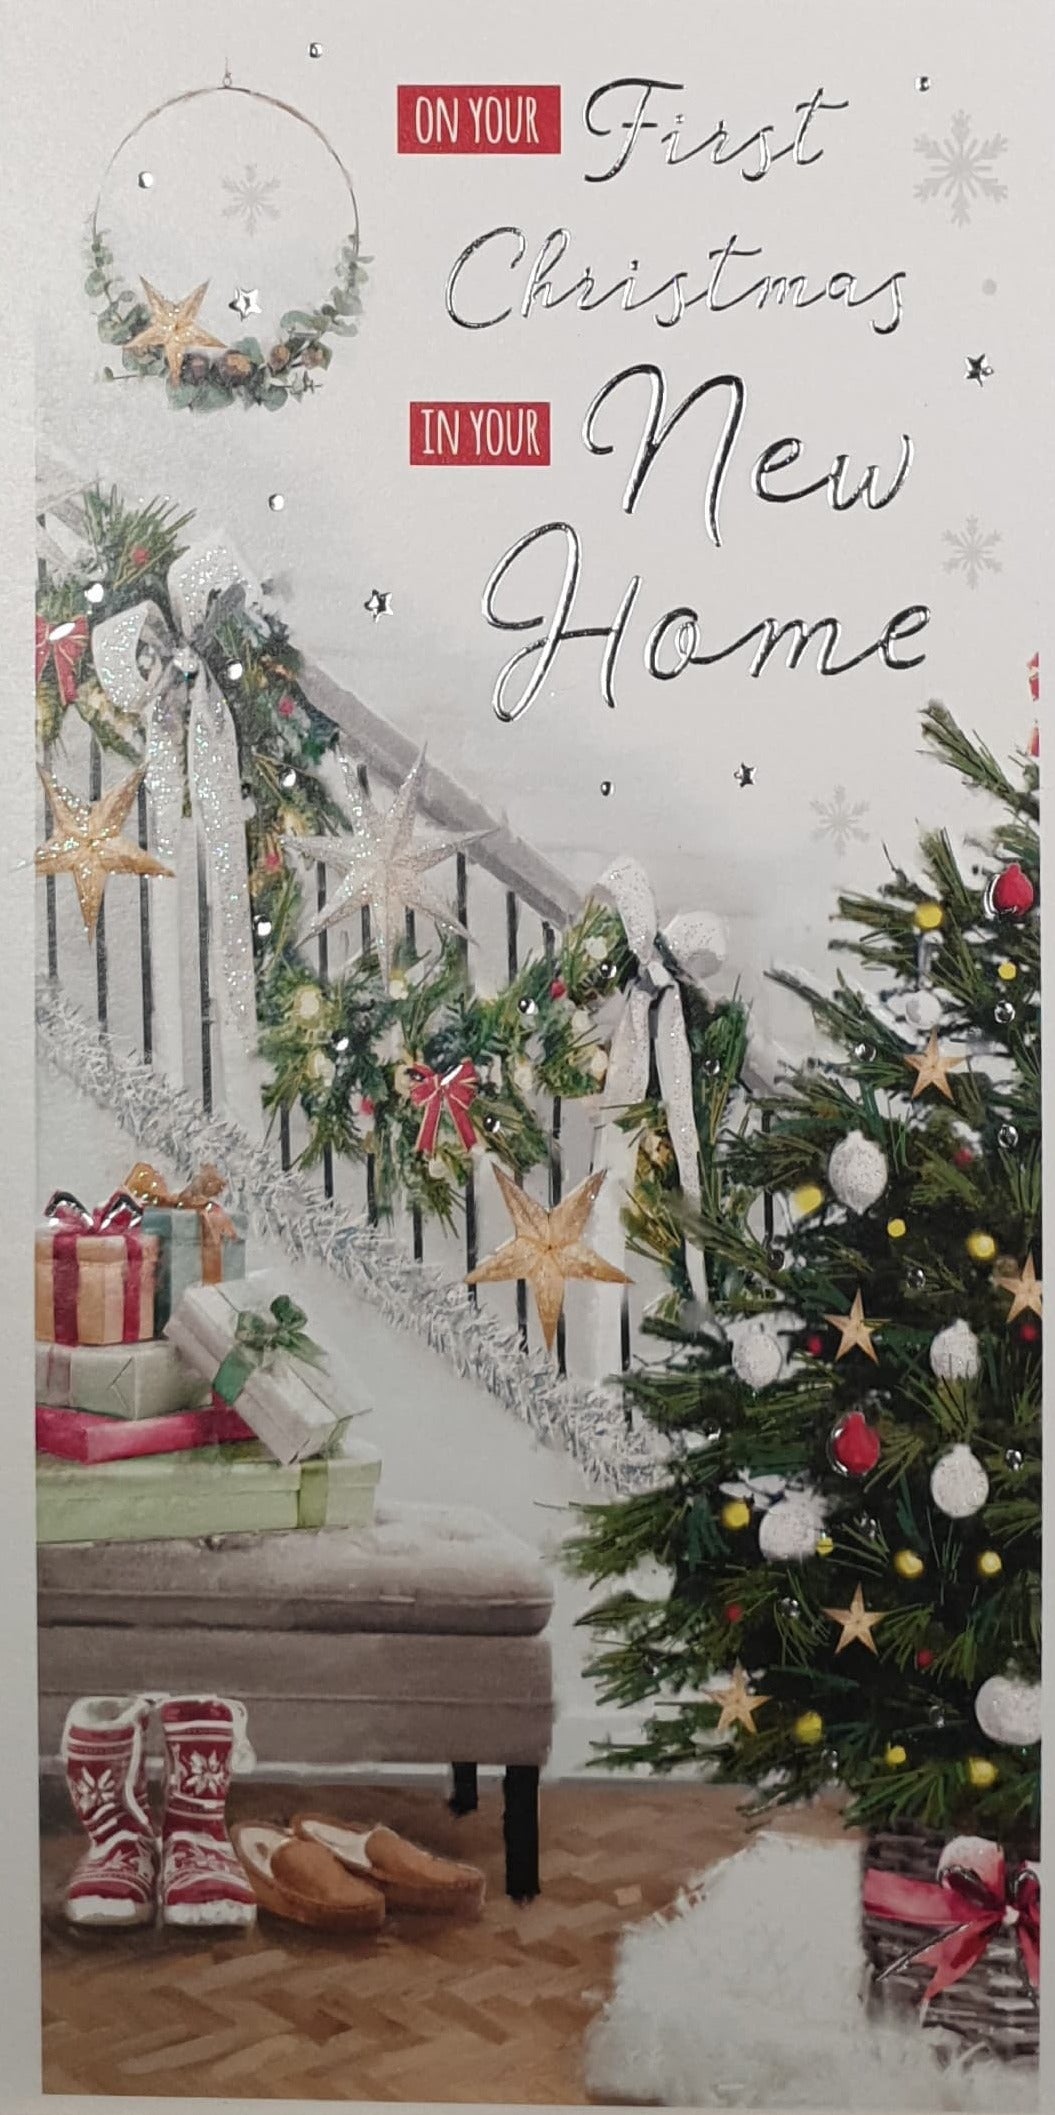 First Christmas In New Home Christmas Card - Decorated Stairs & Tree